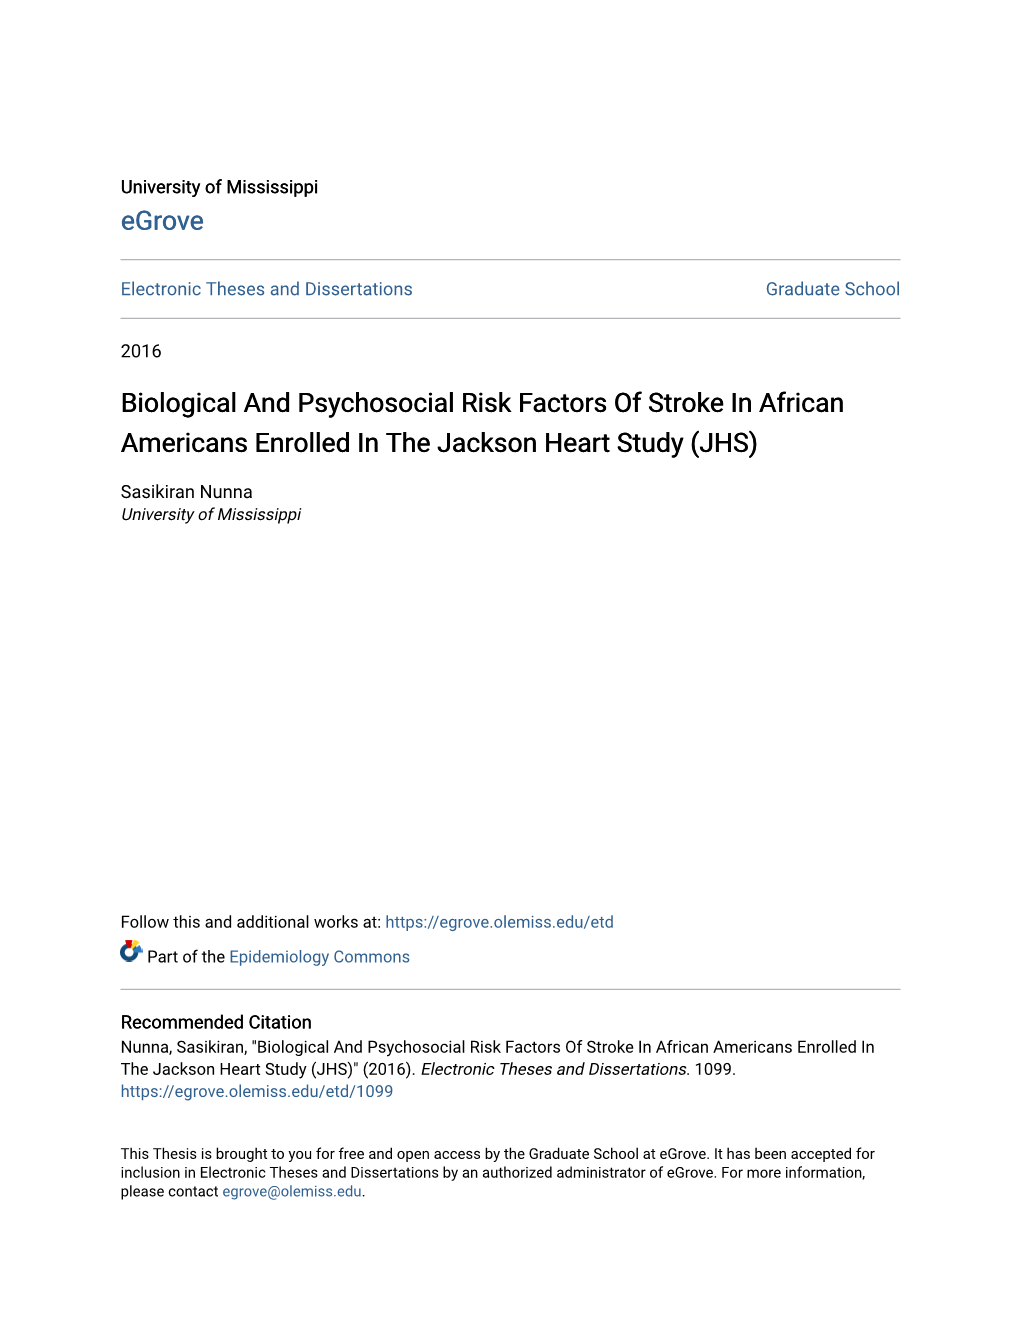 Biological and Psychosocial Risk Factors of Stroke in African Americans Enrolled in the Jackson Heart Study (JHS)